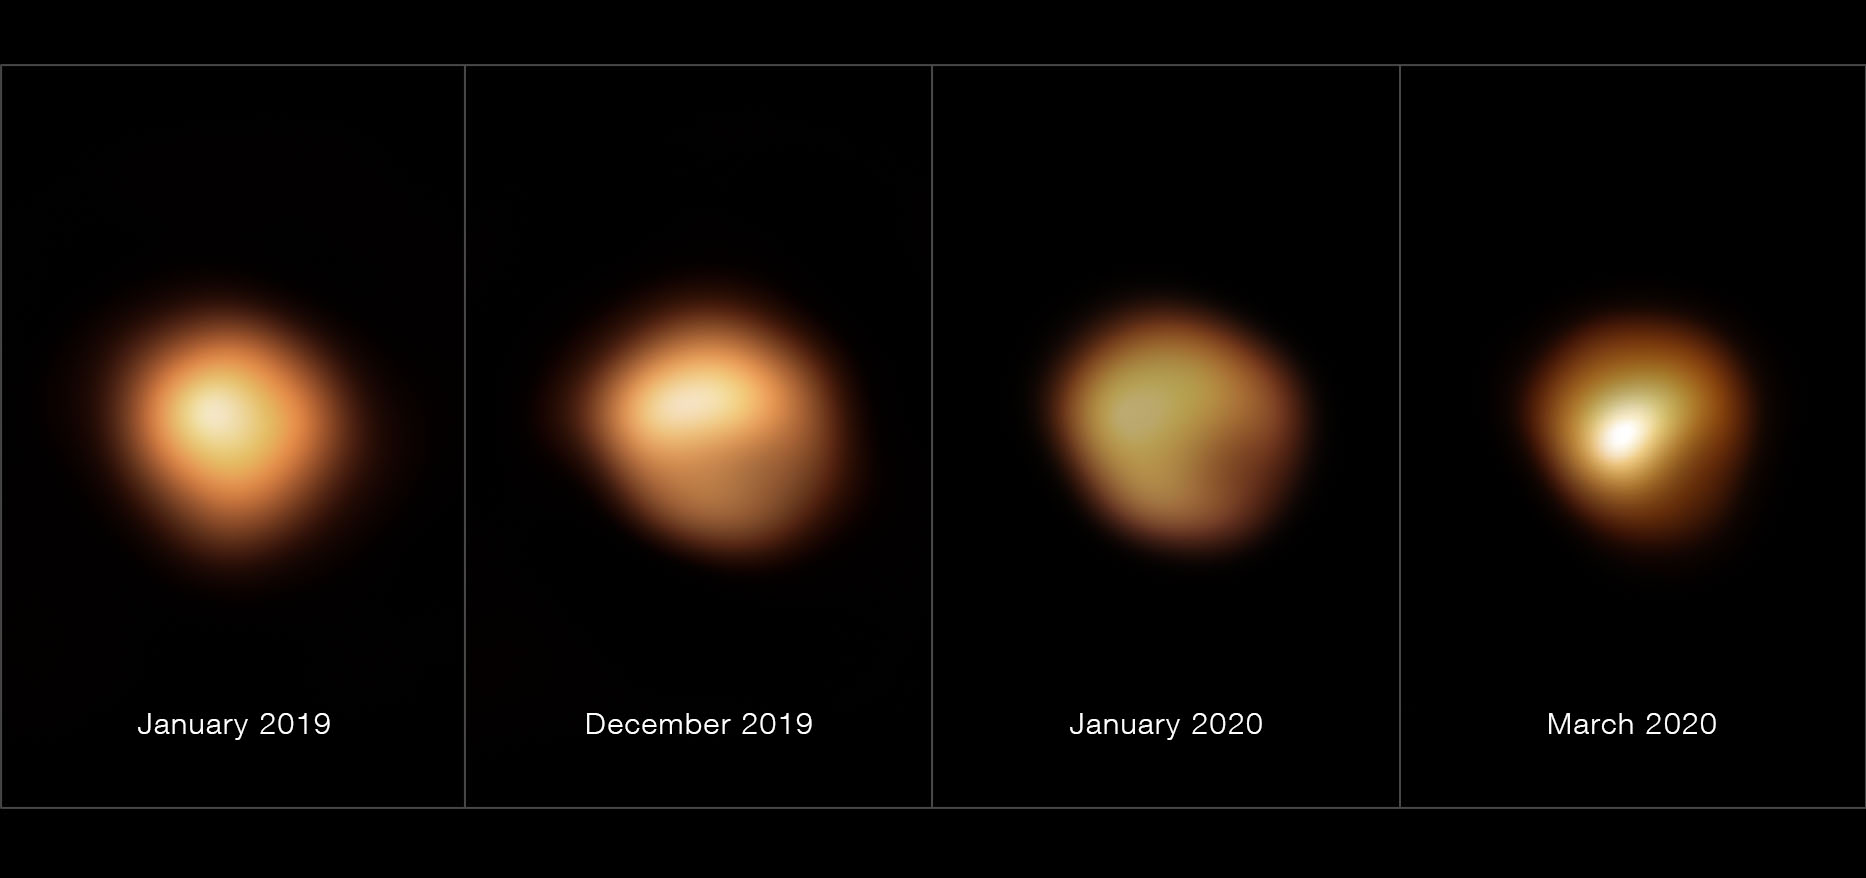 These images show the surface of the red supergiant star Betelgeuse during its unprecedented dimming, which happened in late 2019 and early 2020. The image on the far left, taken in January 2019, shows the star at its normal brightness, while the remaining images, from December 2019, January 2020, and March 2020, were all taken when the star's brightness had noticeably dropped, especially in its southern region.